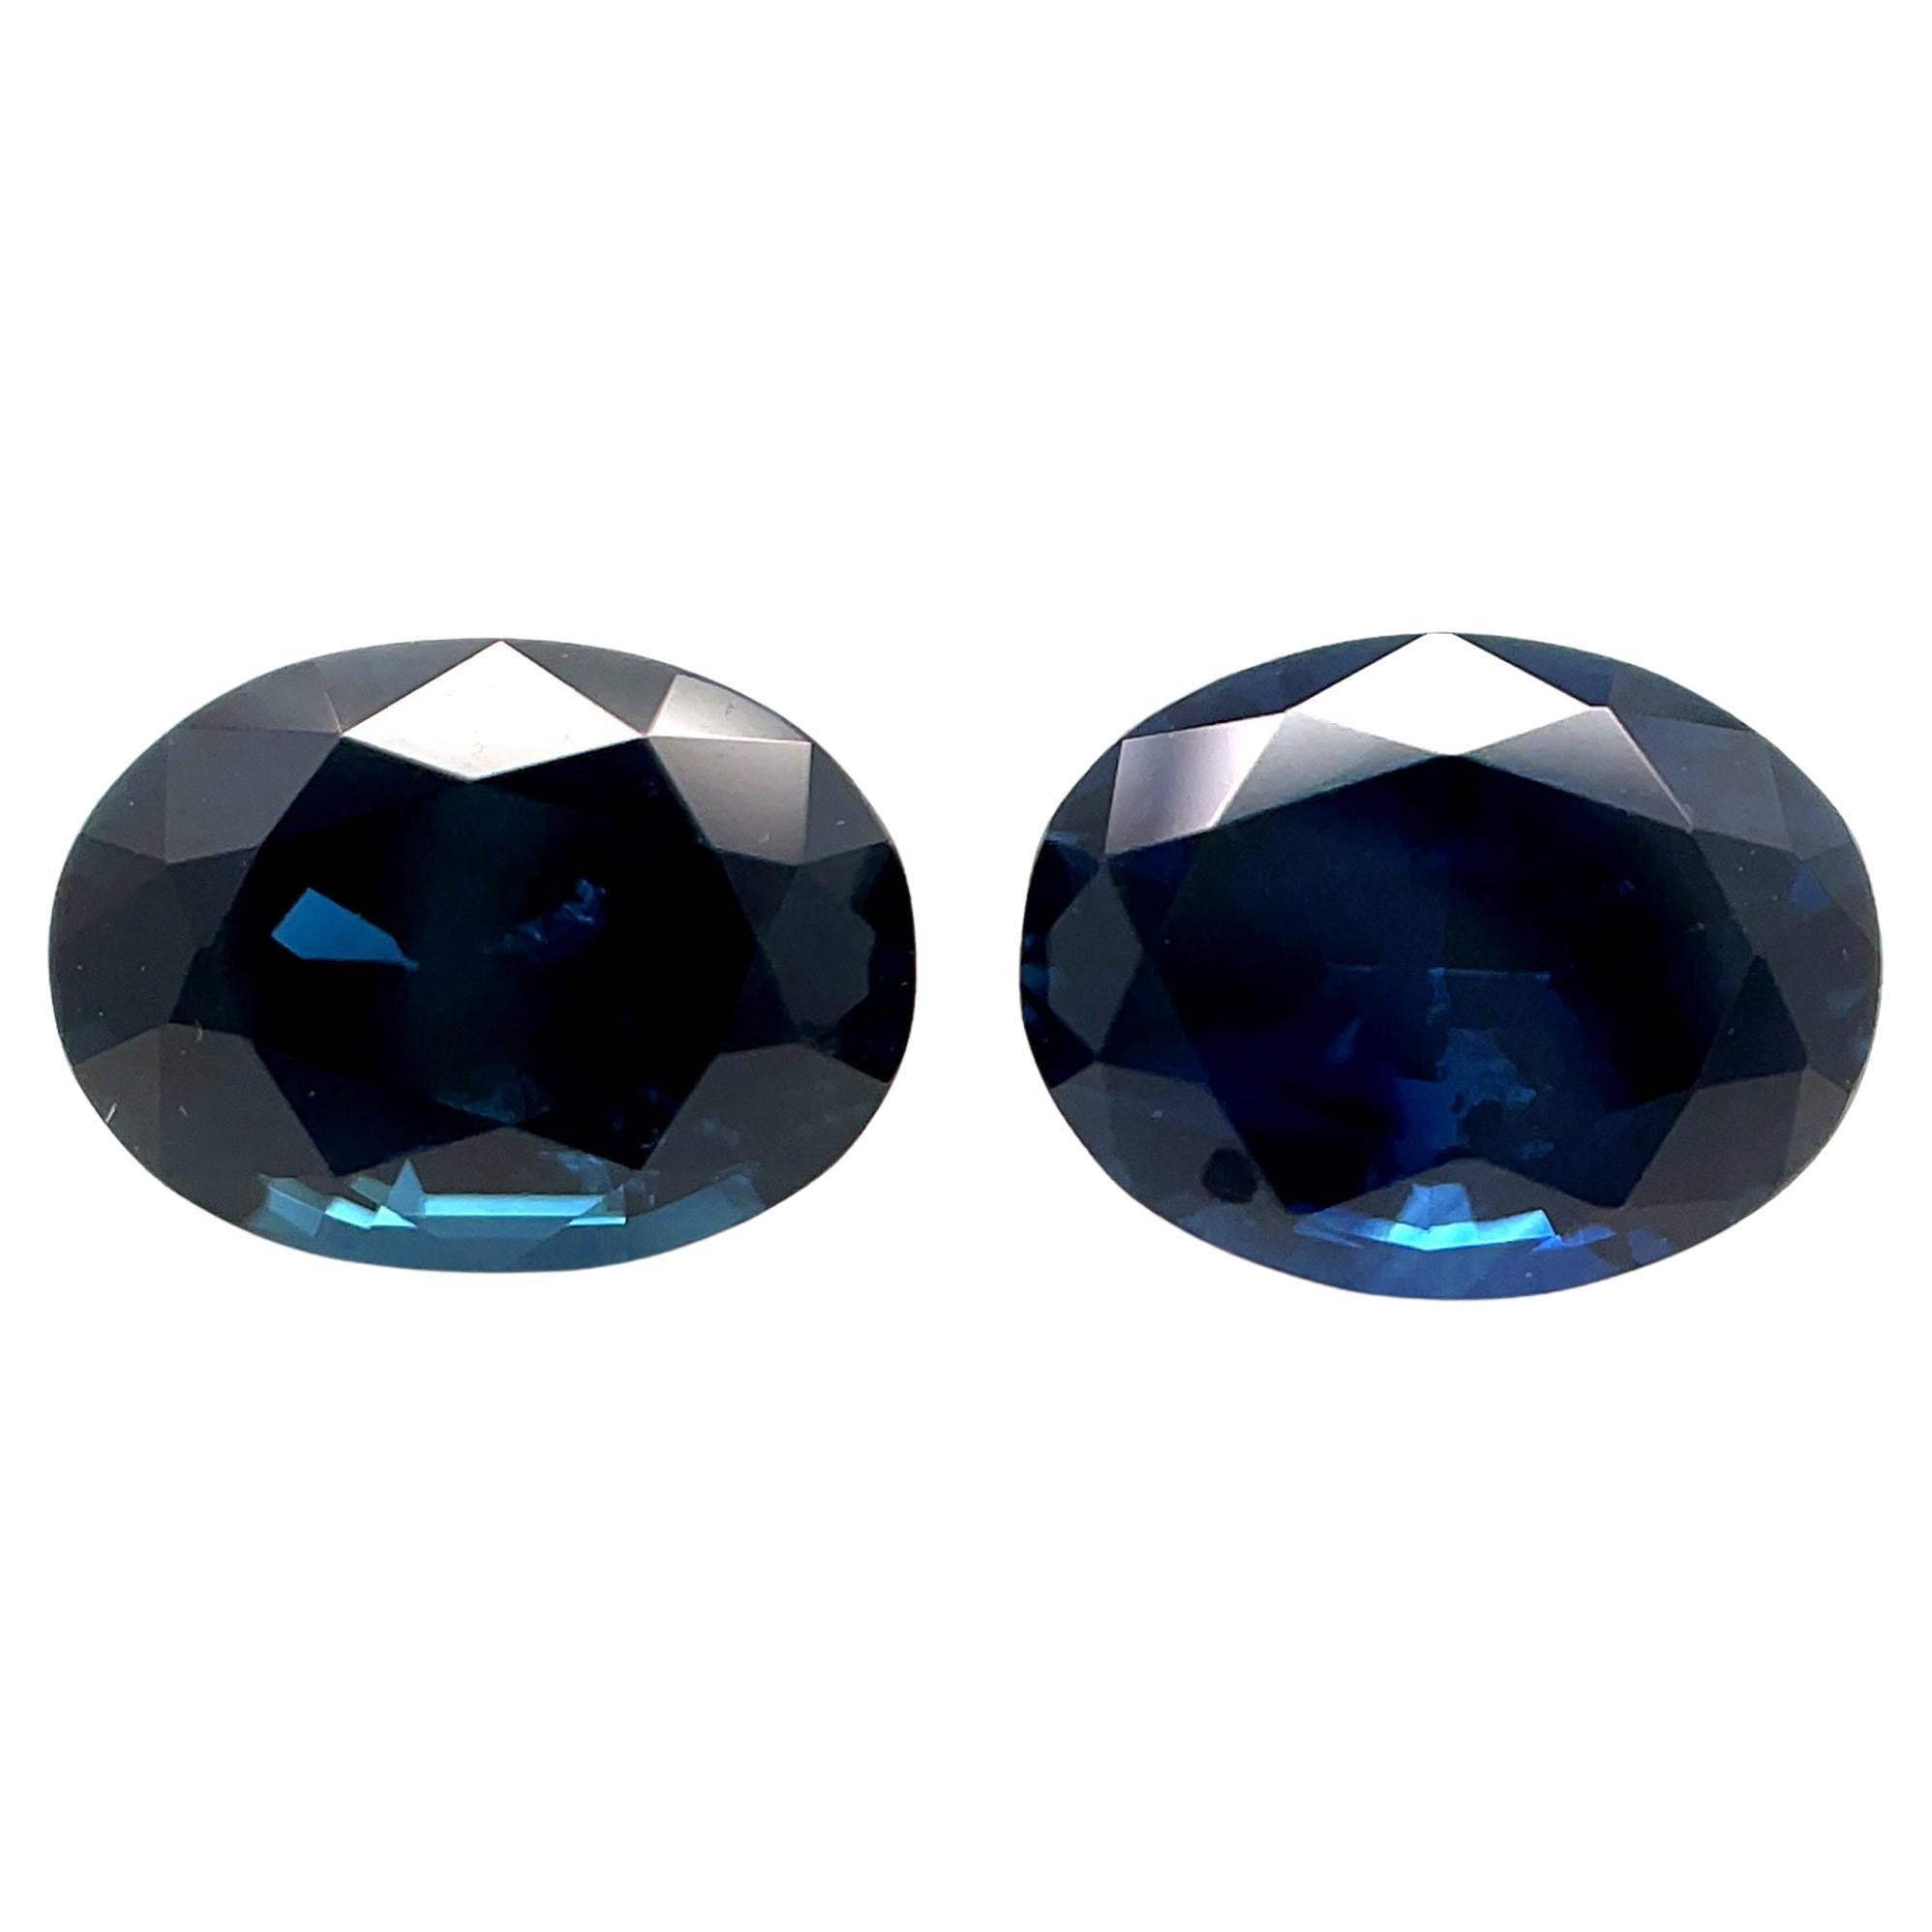  Royal Blue Sapphire Pair, 3.82 Carats Total, Loose Gemstones for Earrings